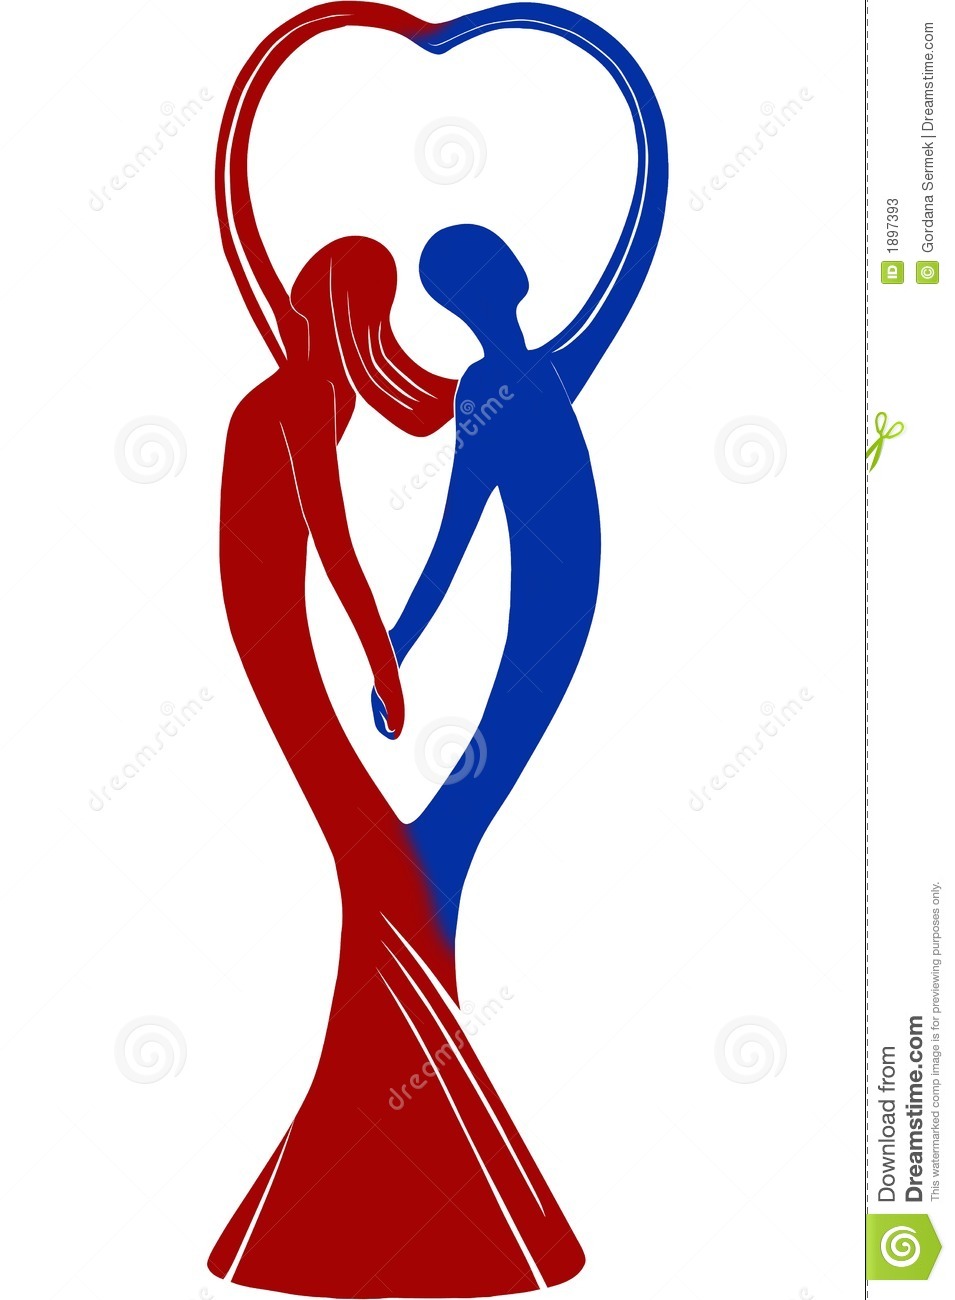 Couple Holding Hands Cartoon Clipart | Free download on ClipArtMag